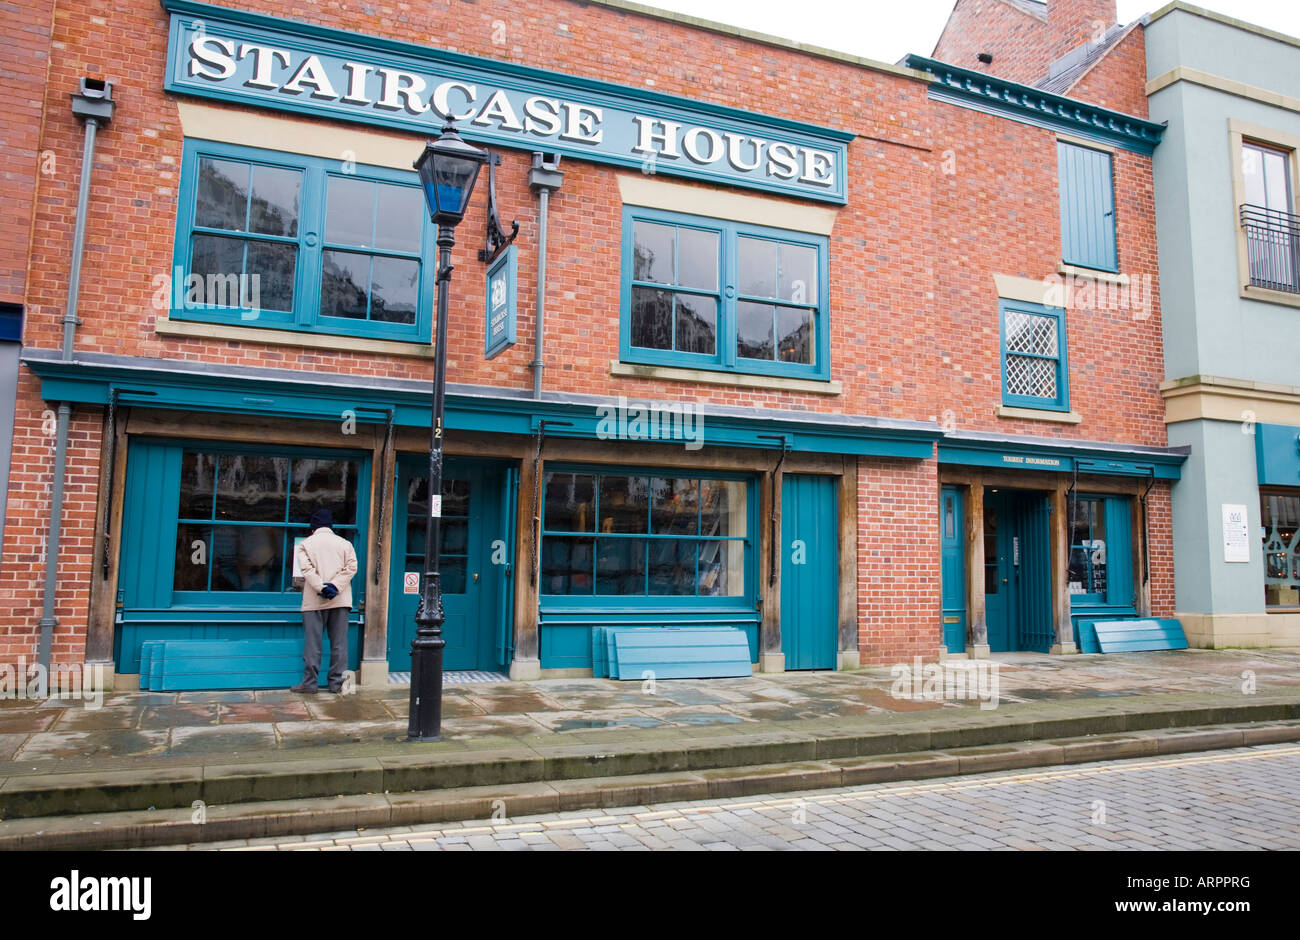 Staircase House and tourist information. Stockport Market, Stockport, Greater Manchester, United Kingdom. Stock Photo